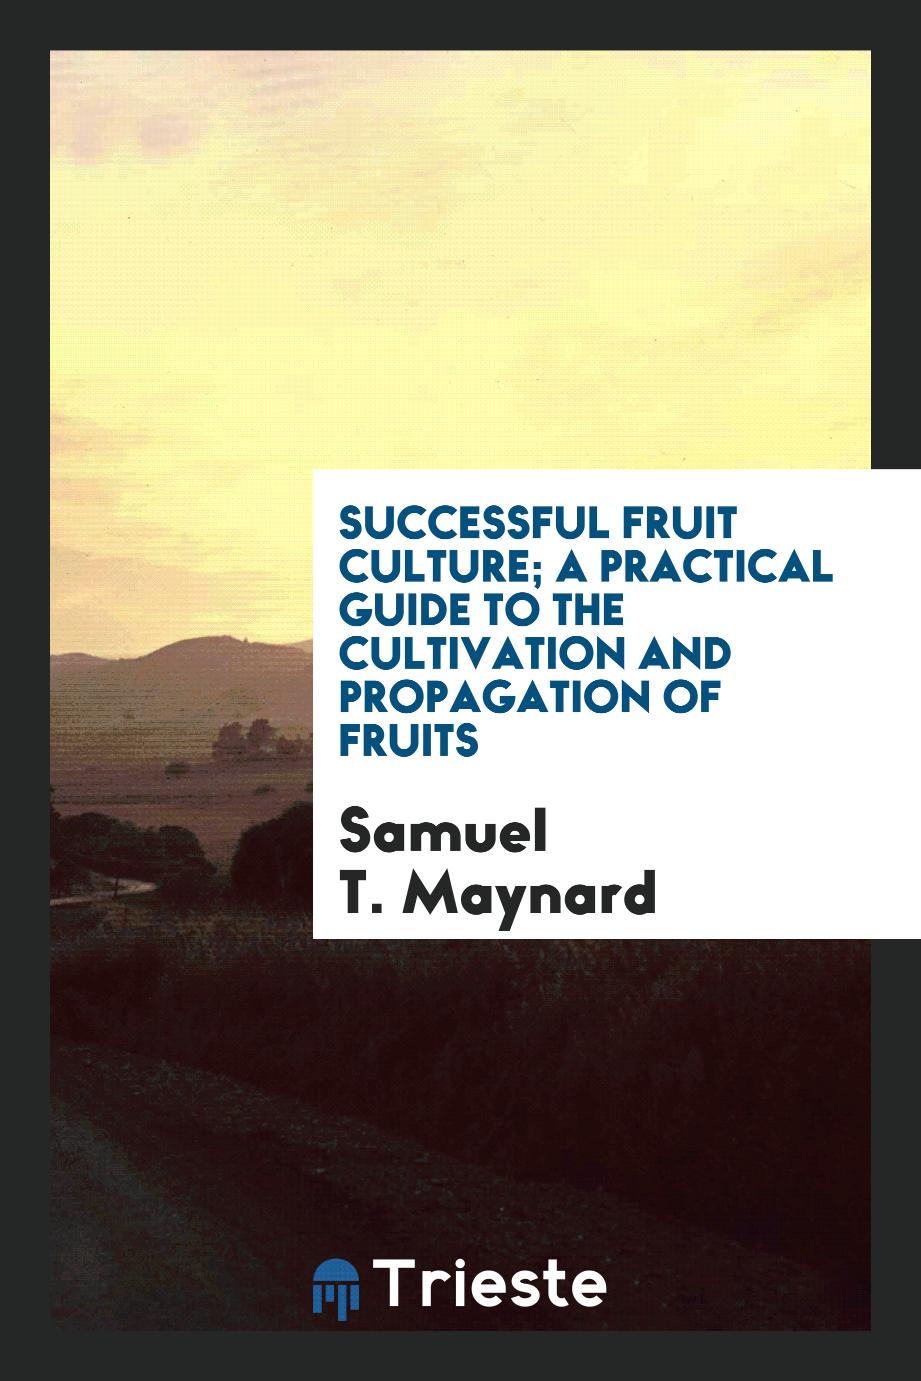 Successful fruit culture; a practical guide to the cultivation and propagation of fruits